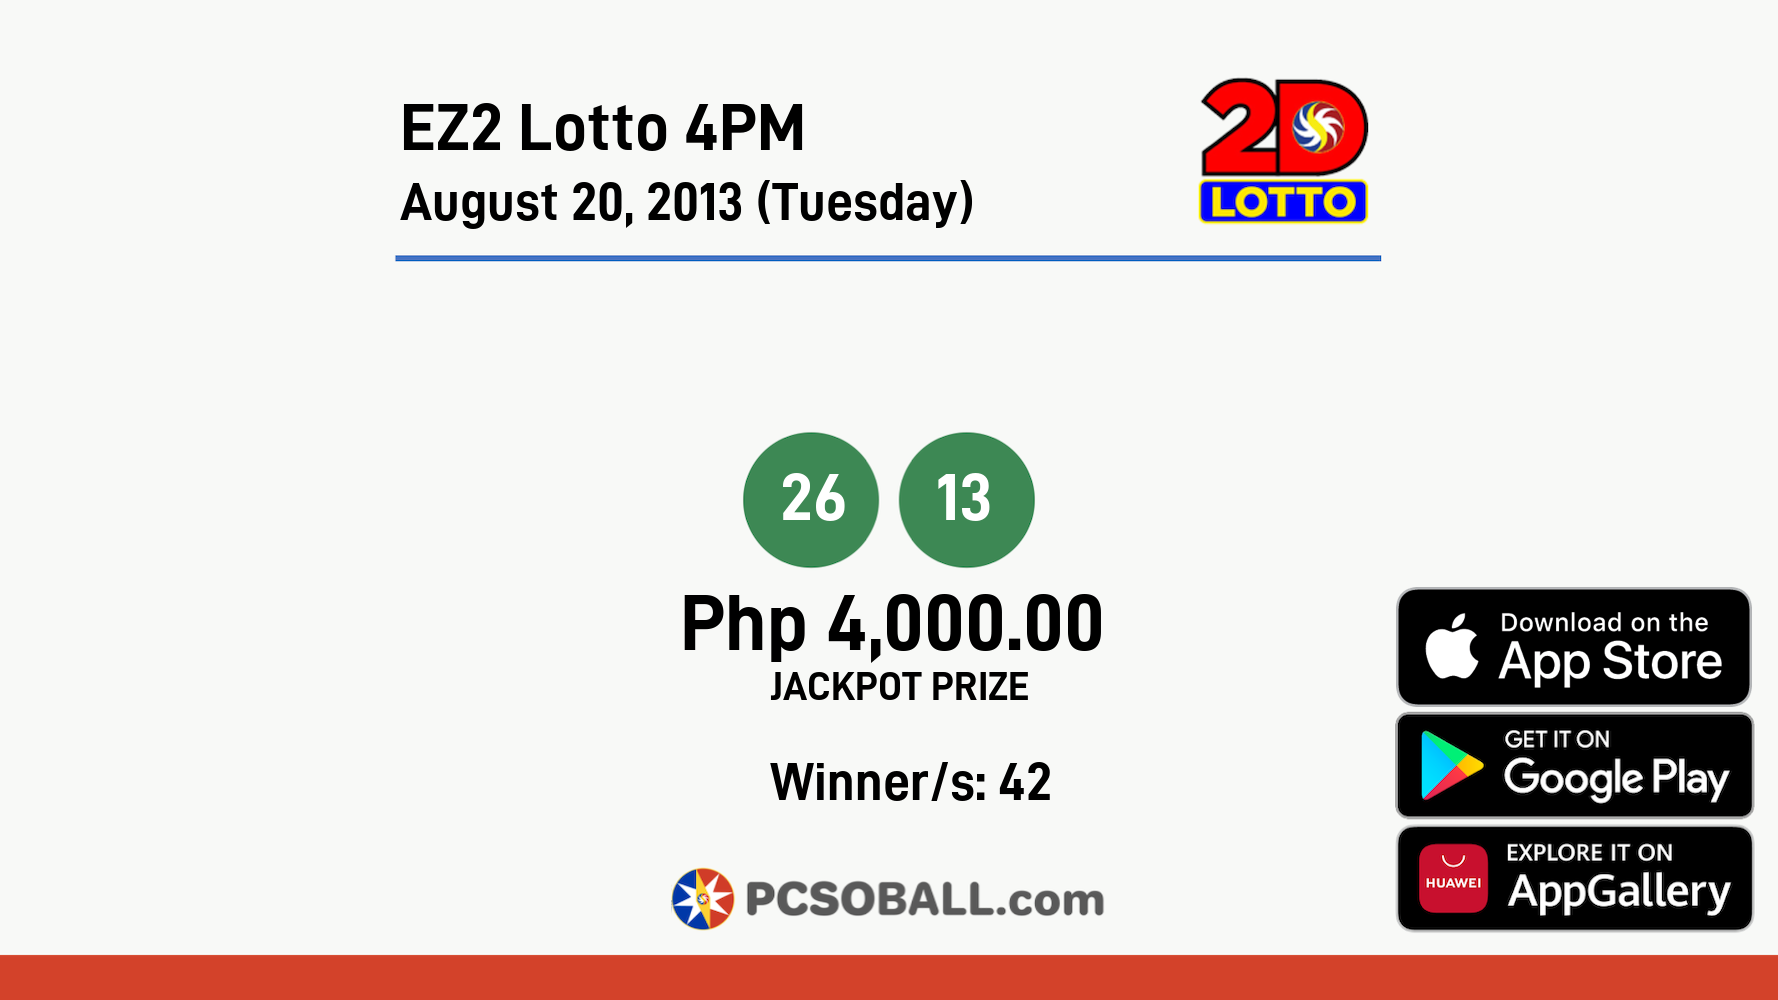 EZ2 Lotto 4PM August 20, 2013 (Tuesday) Result